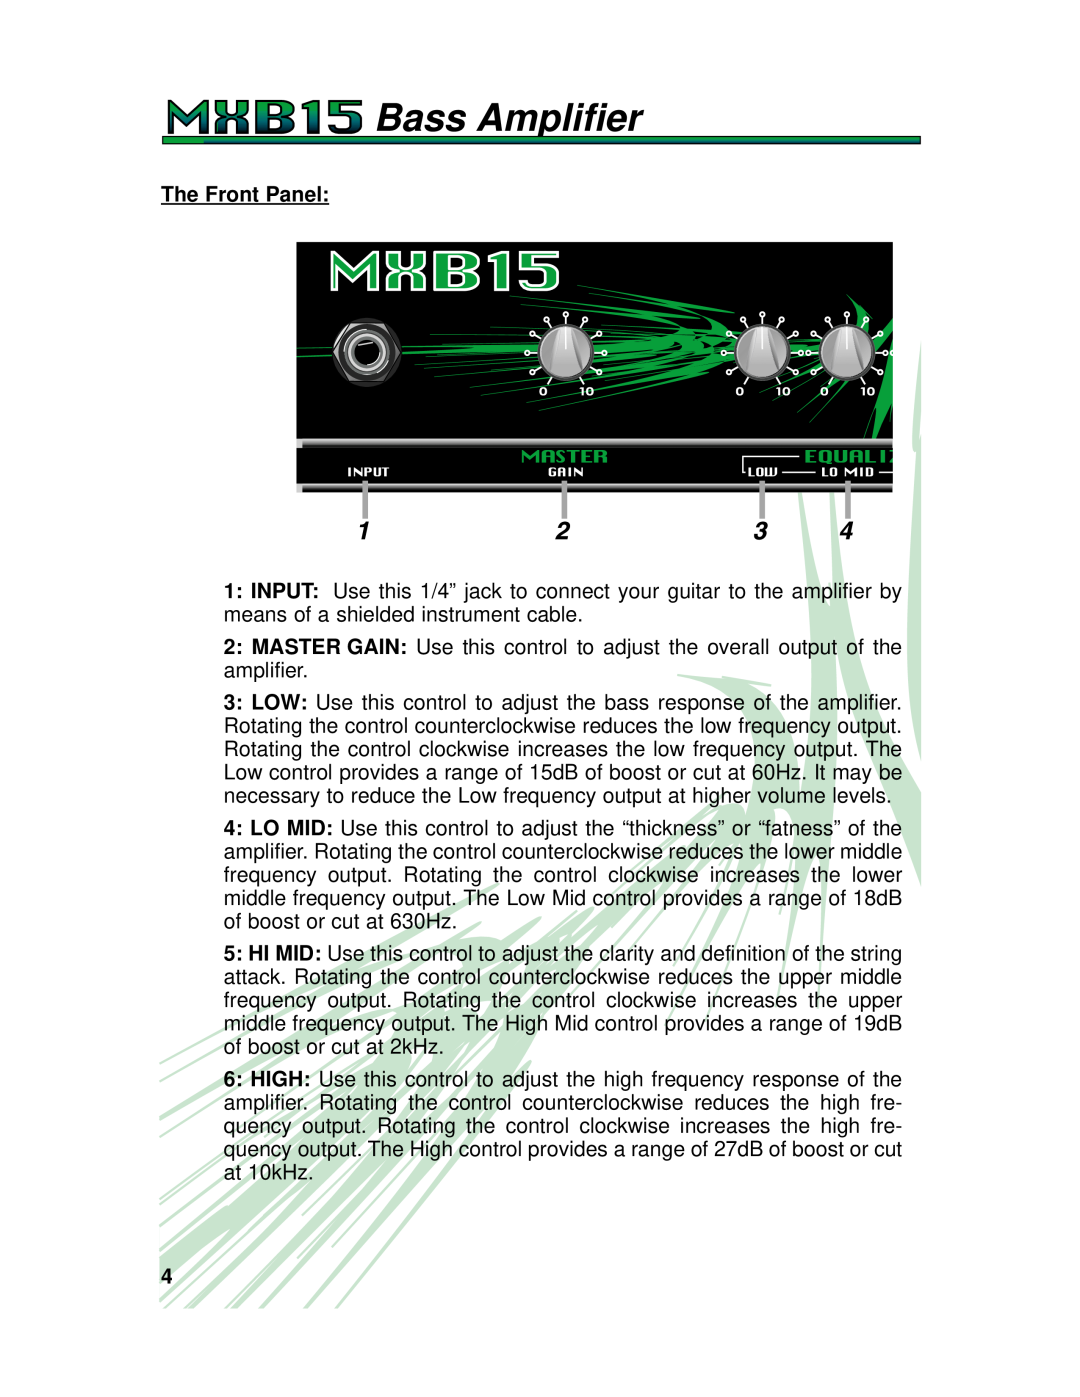 Crate Amplifiers MXB15 manual The Front Panel, Bass Amplifier 